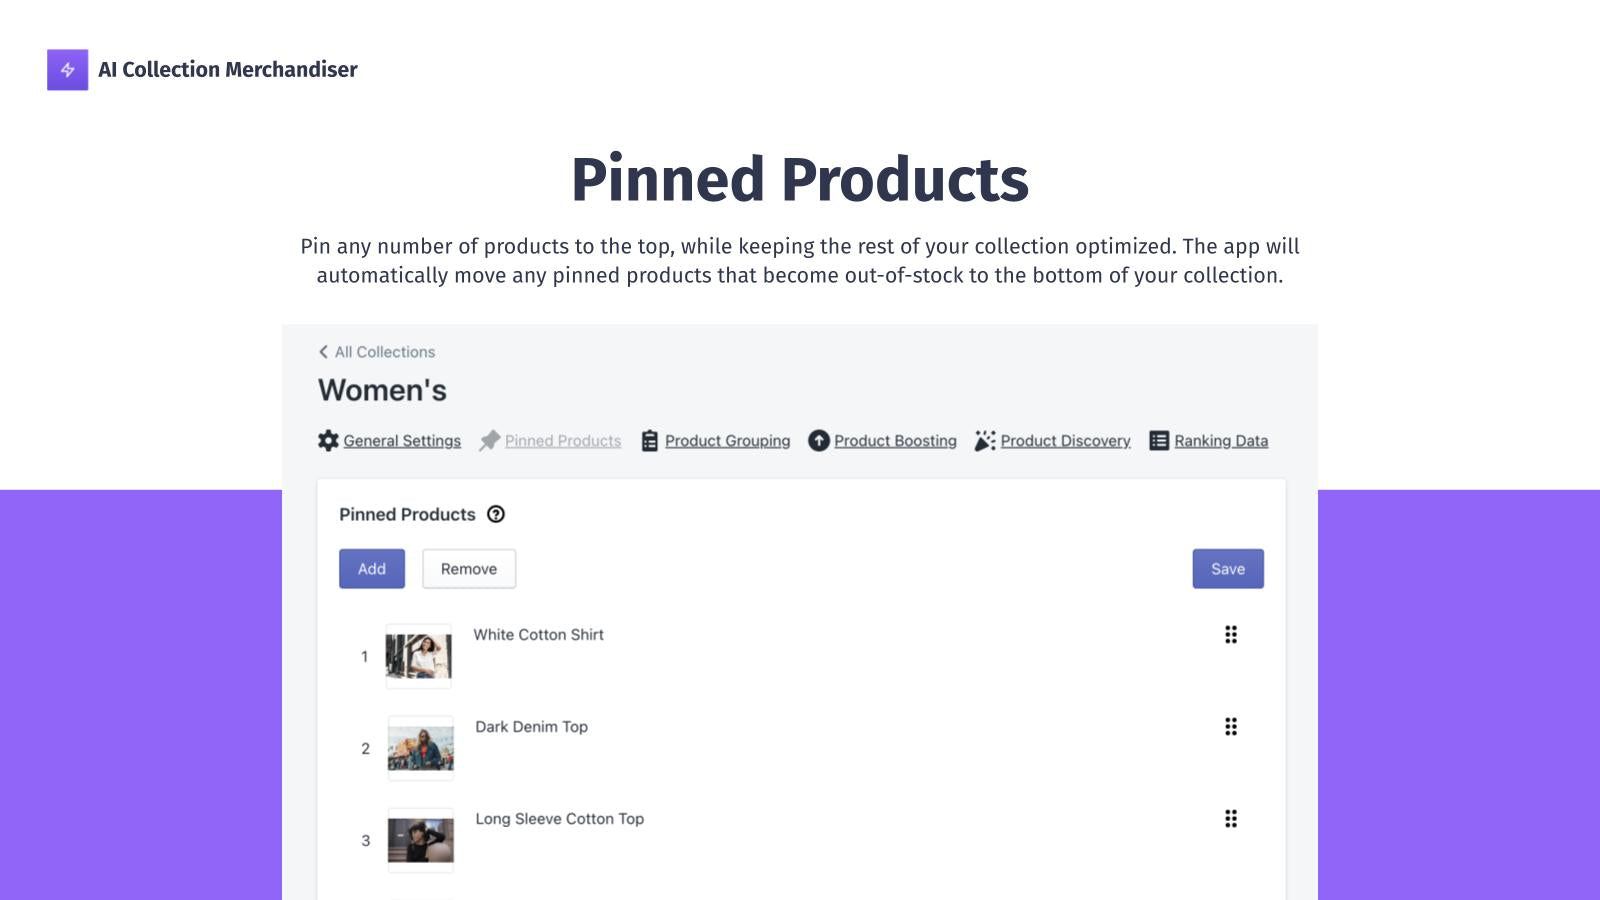 Promote products by pinning them to the top of a collection